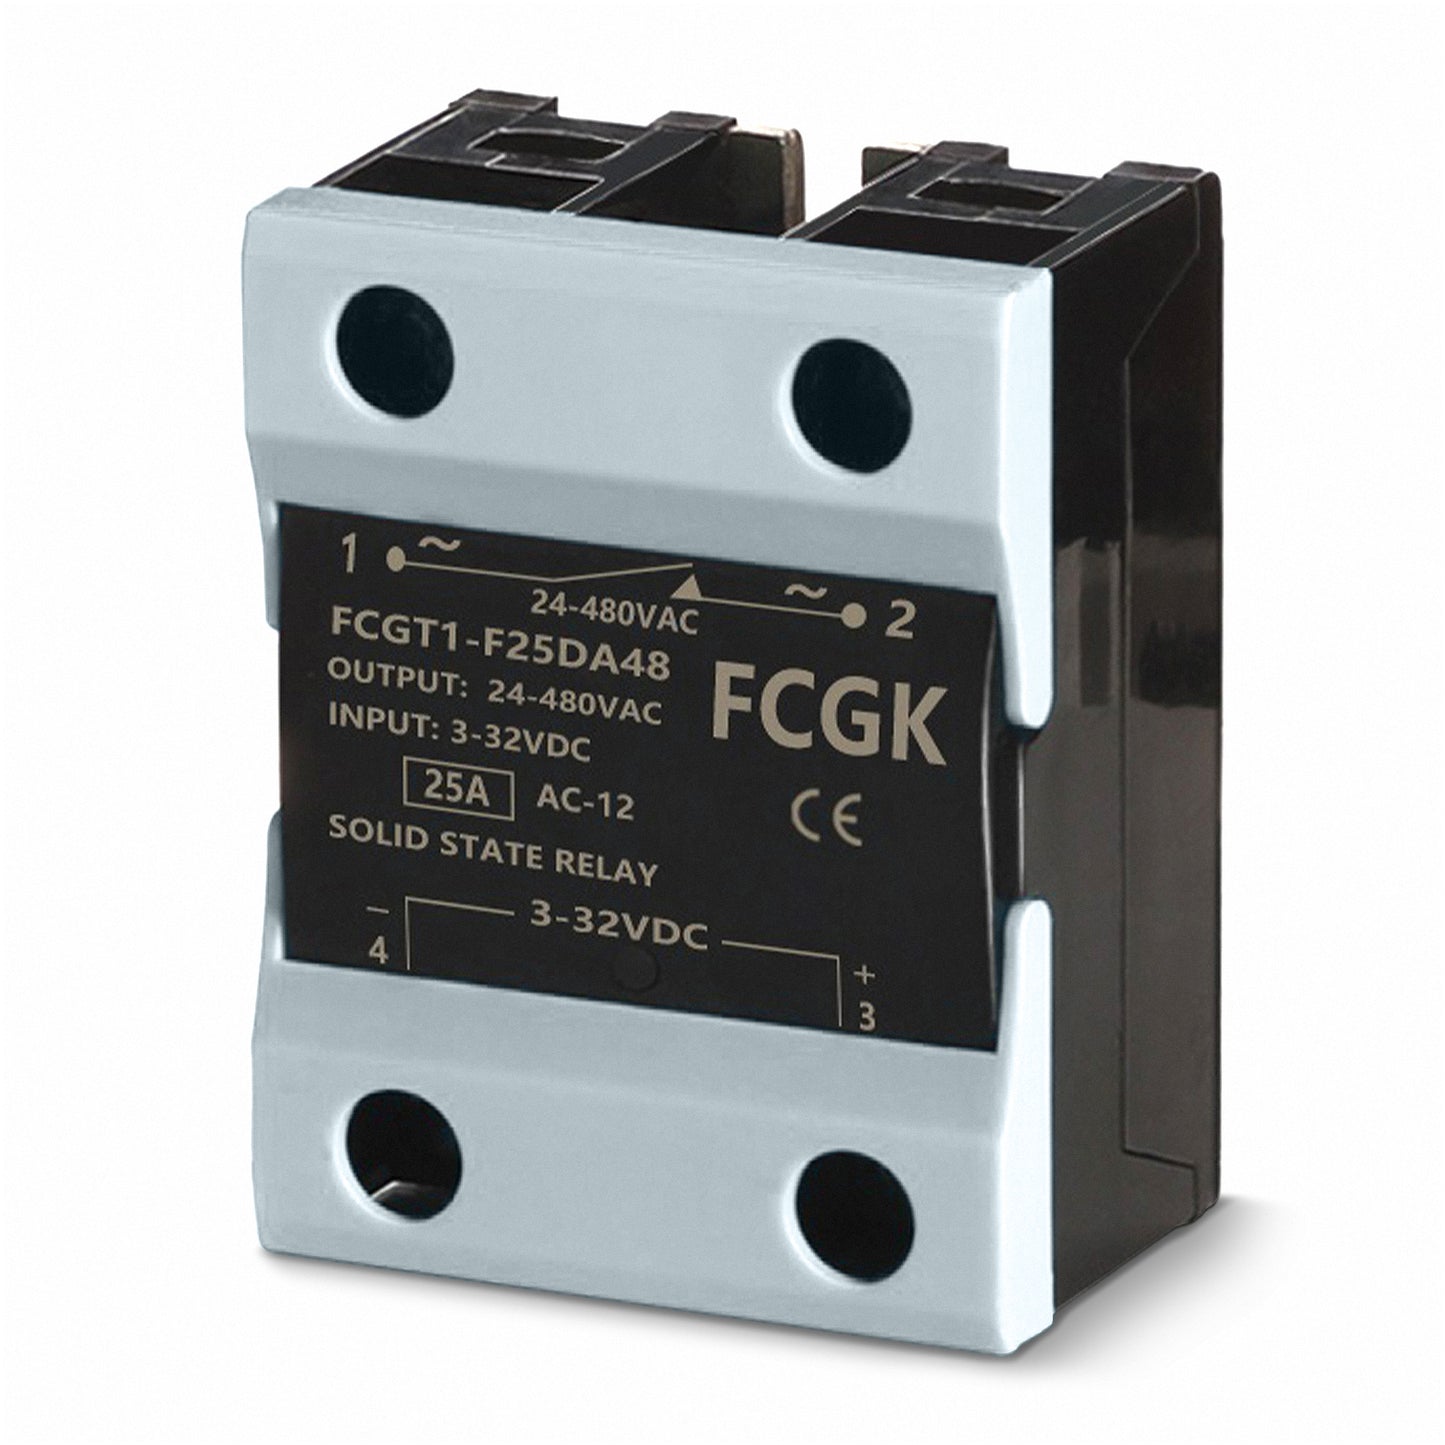 FCGK Solid State Relay SSR-25DA DC to AC Input 3-32VDC to Output 24-480VAC 25A Single Phase Plastic Cover